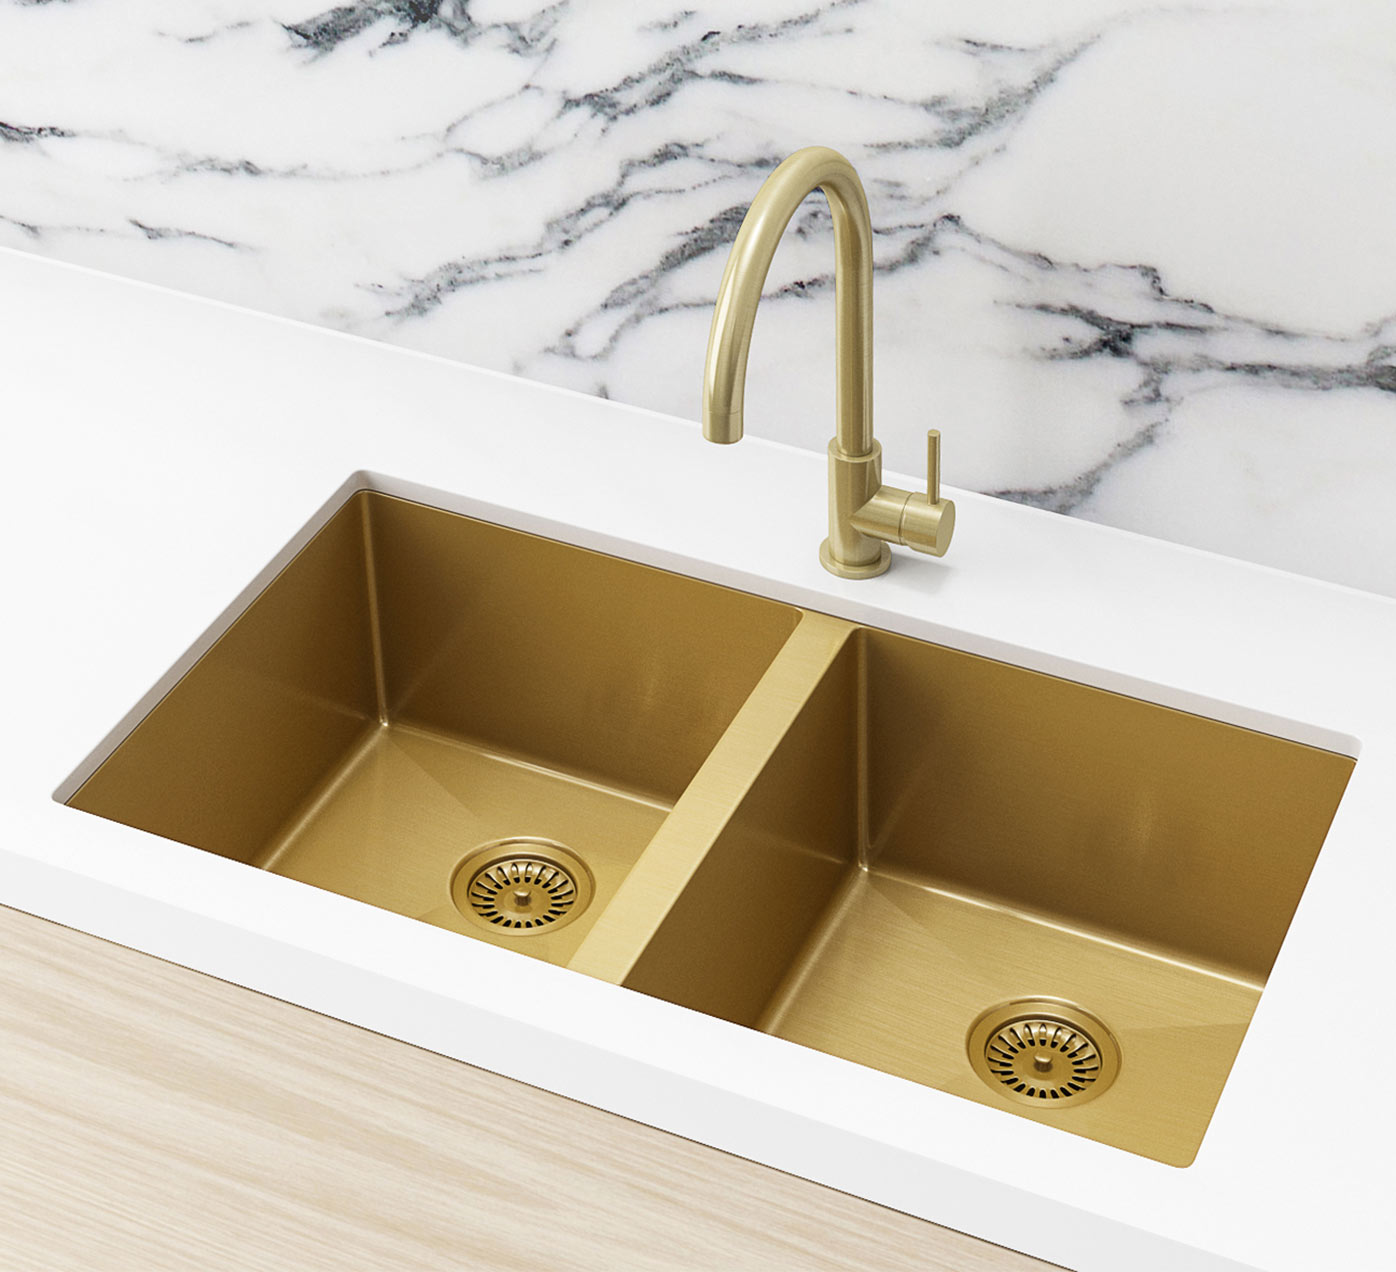 Double Bowl PVD Kitchen Sink in Brushed Bronze Gold 760x440x200mm